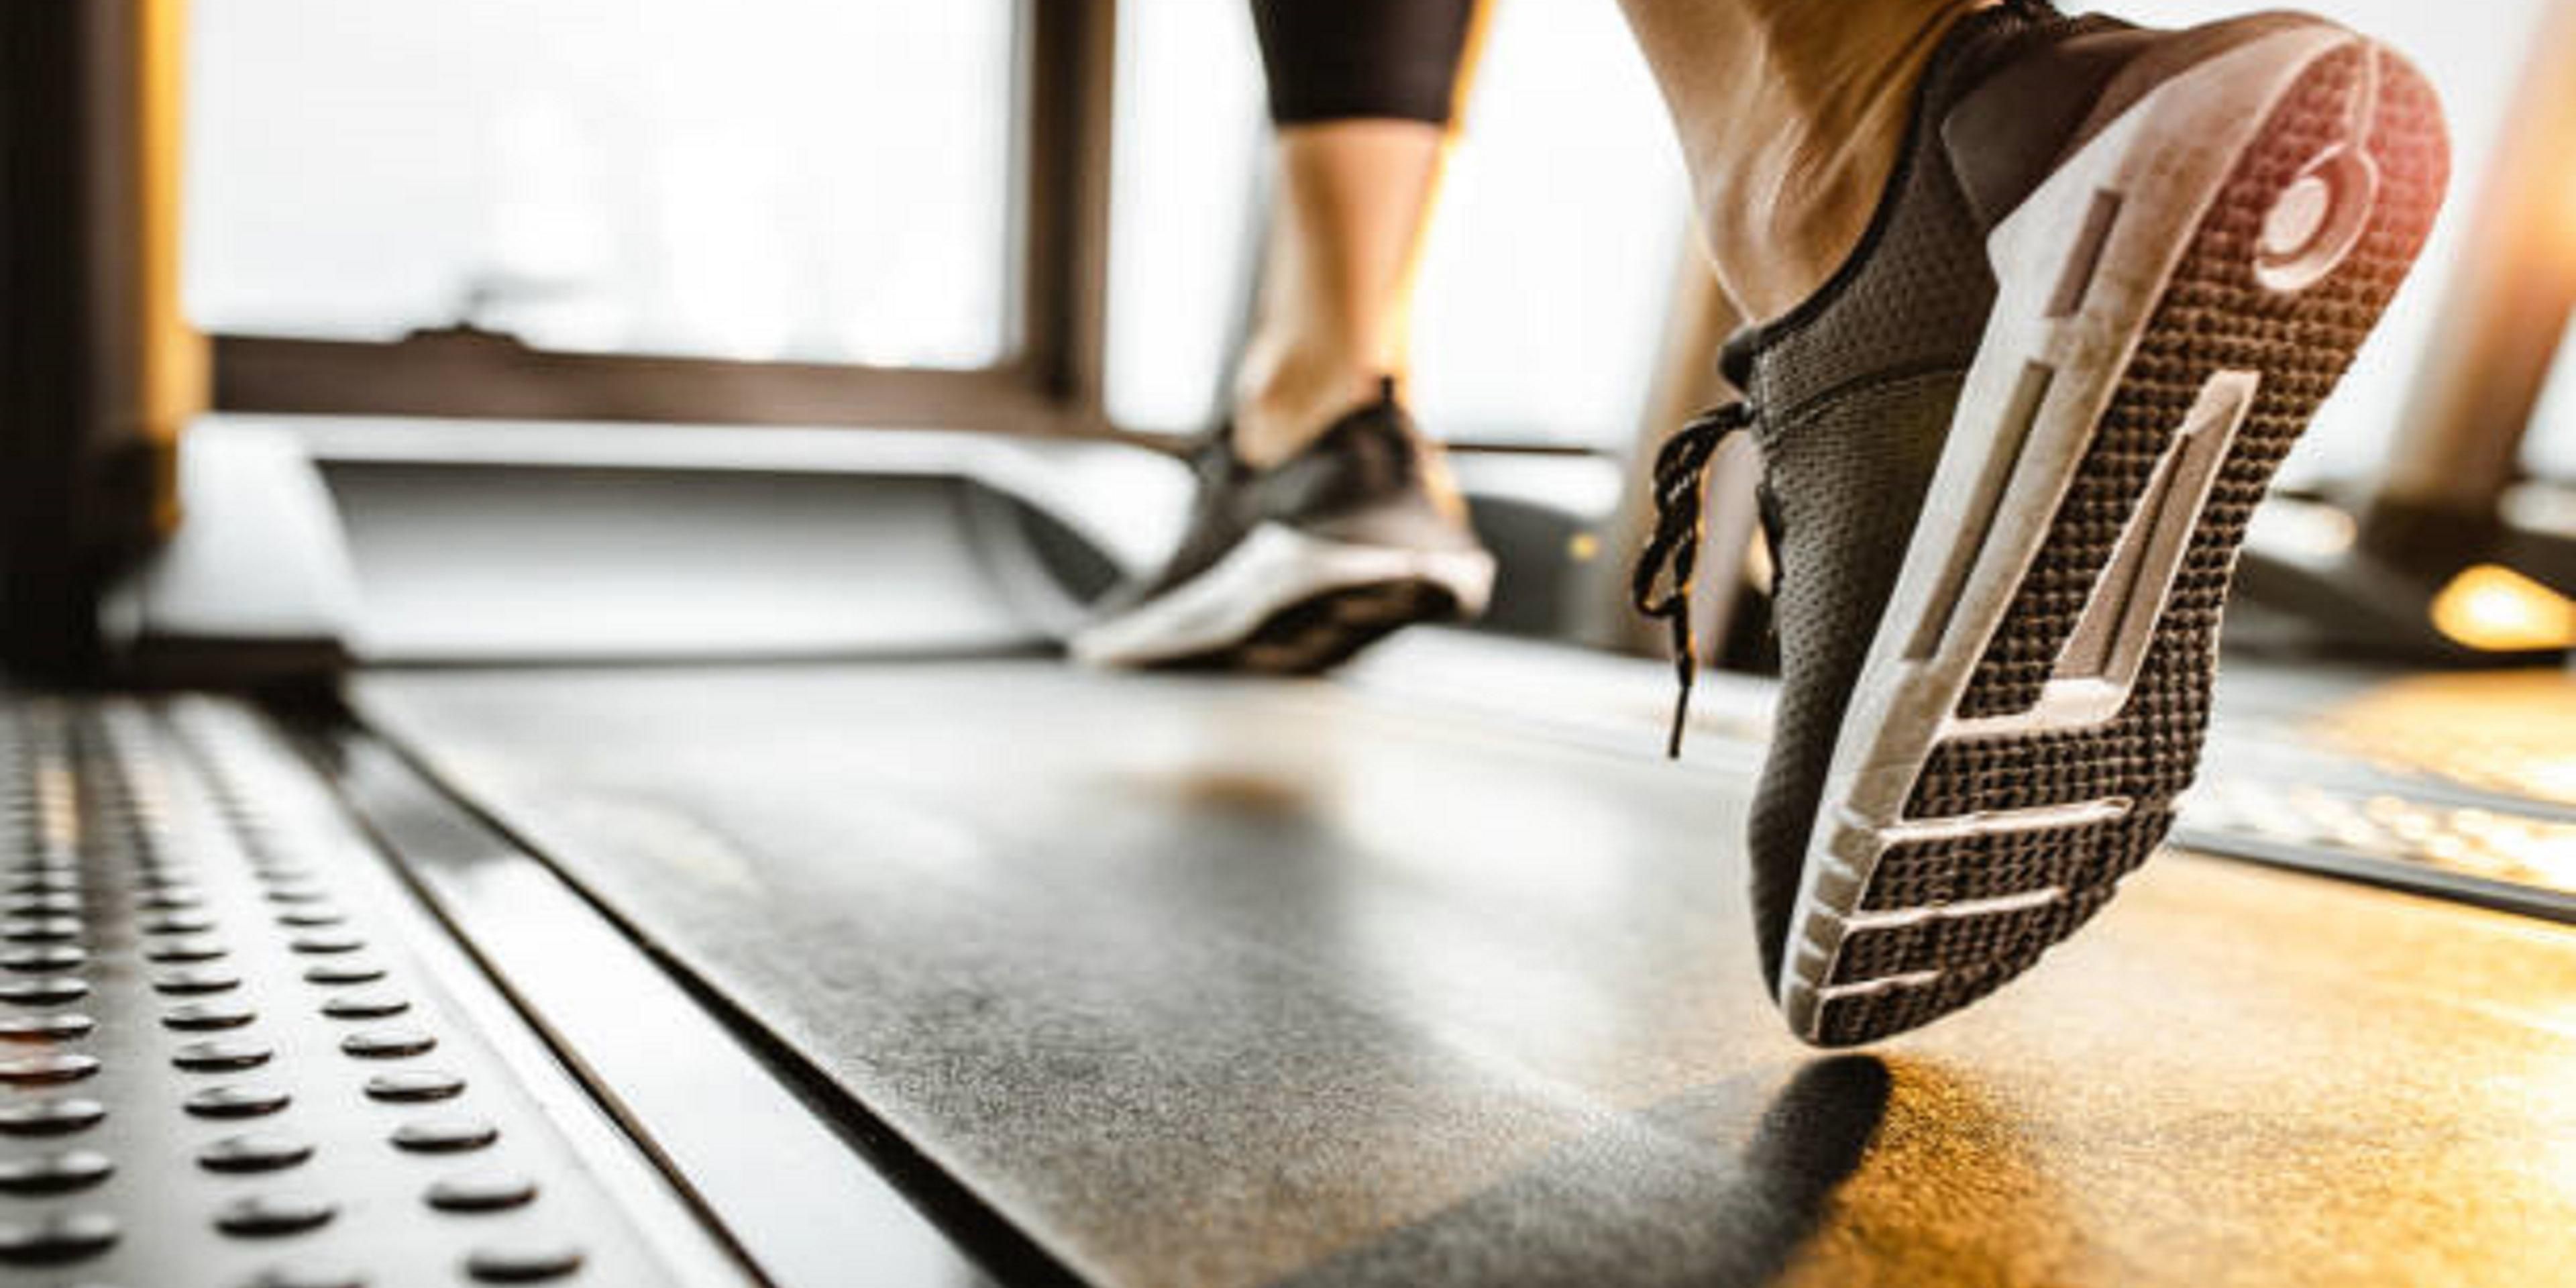 Get your sweat on in our complimentary, fully equipped Fitness Center with a treadmill, elliptical, stationary bike, and free weights. open 24 hours.